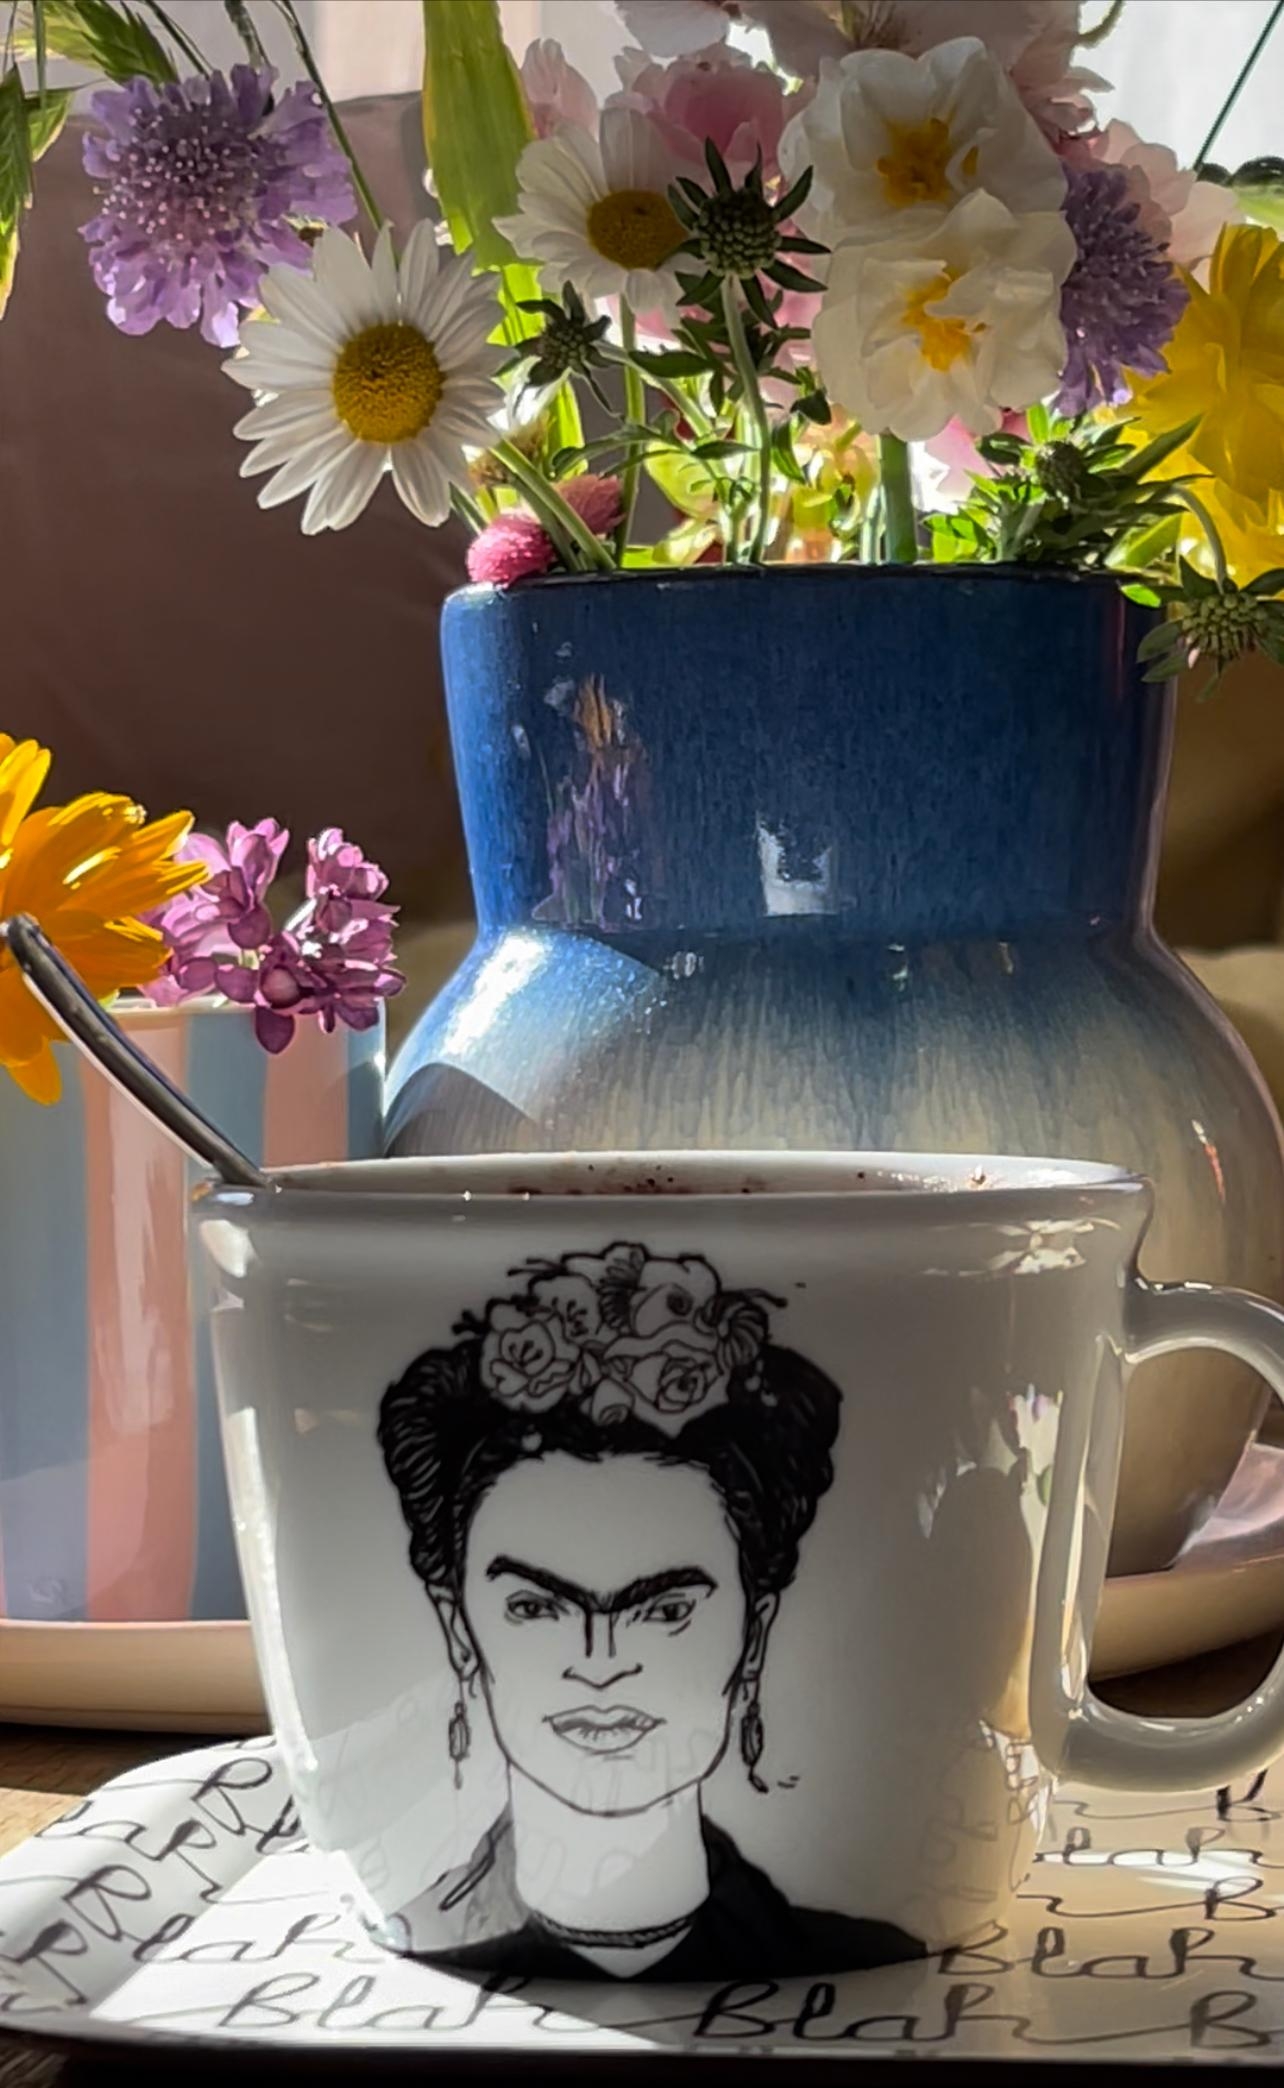 #coffeetime with #frida and her #flowers and a little bit of #blahblahblah 😂 #gutelaunetasse